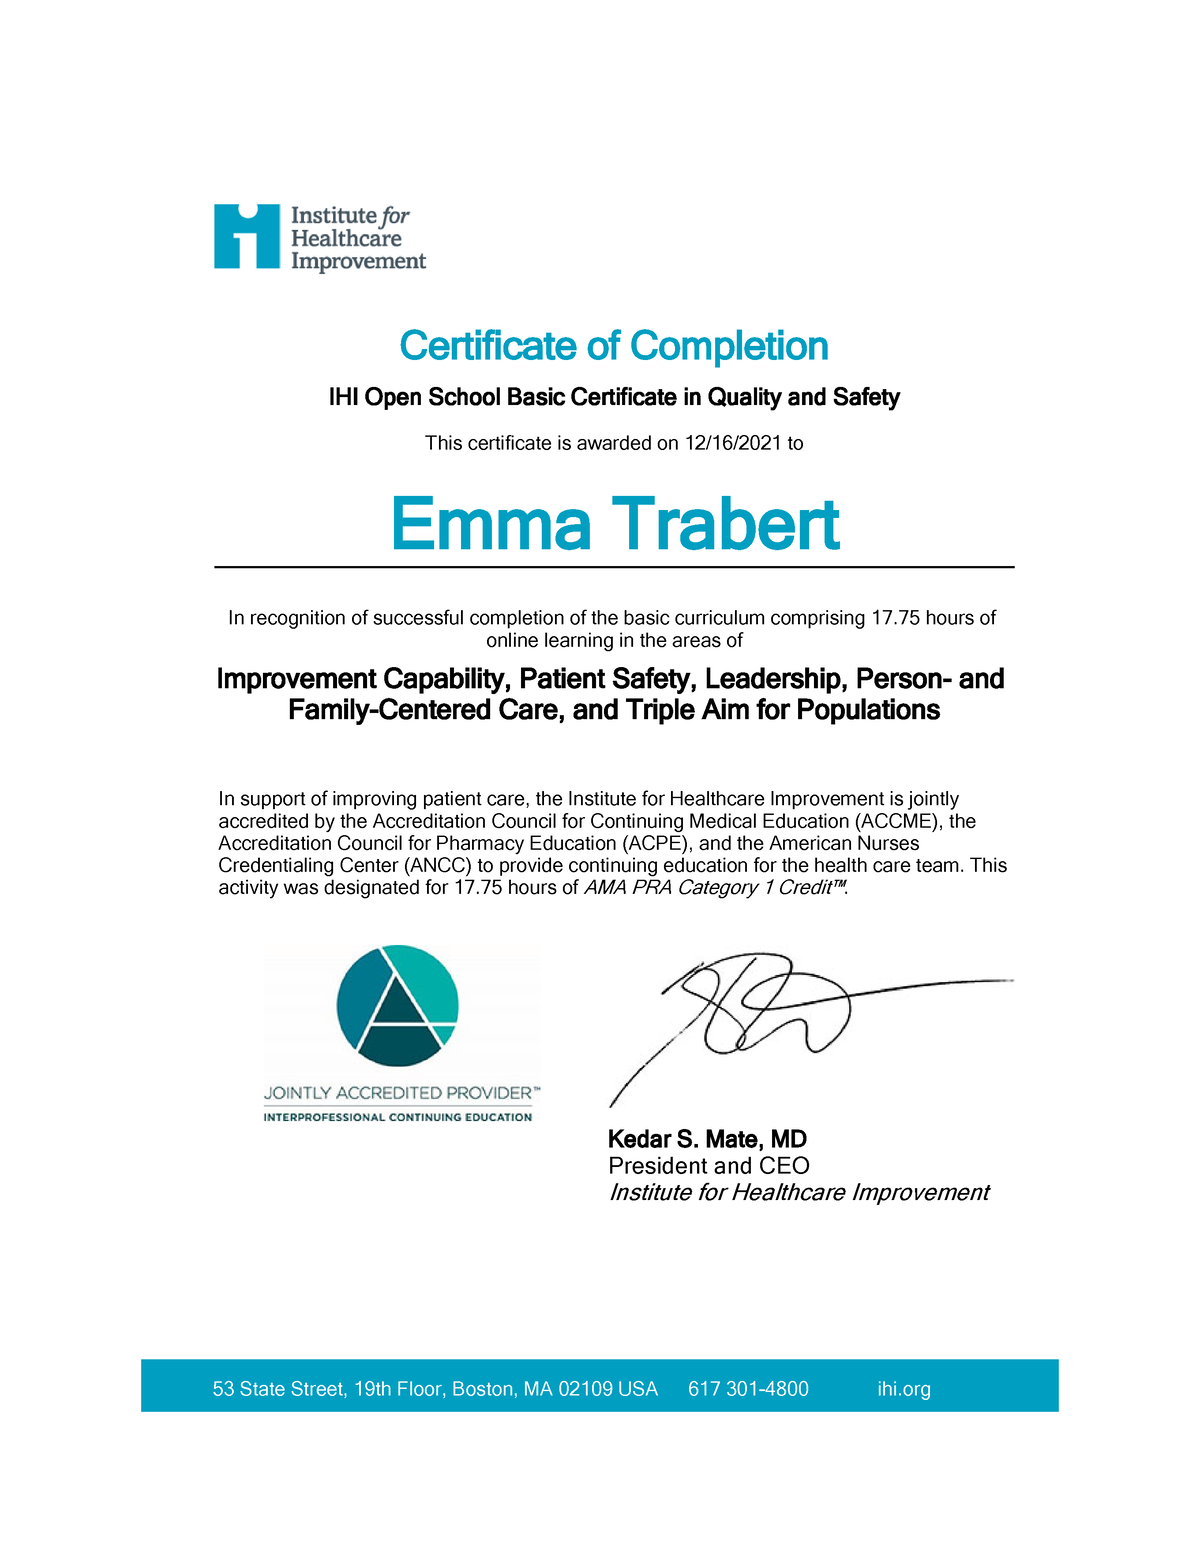 Open School Basic Certificate (1) the Certificate of Completion IHI